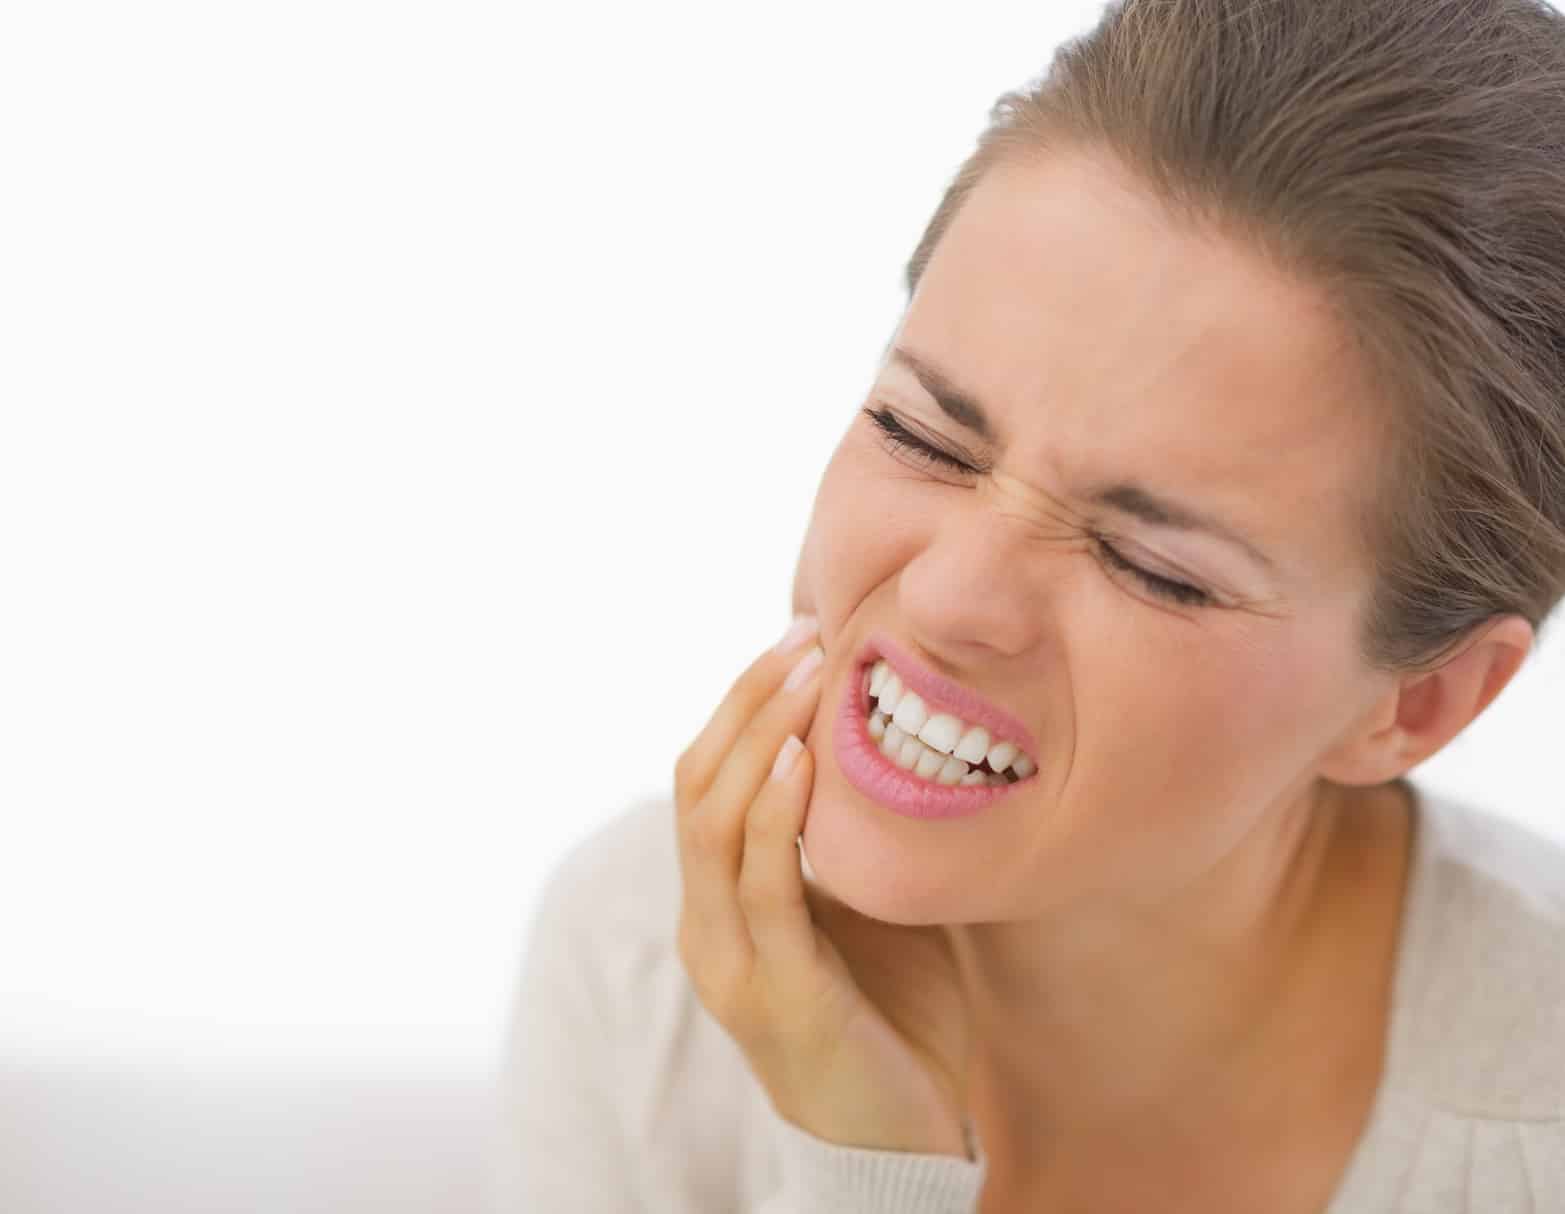 Jaw pain is a common symptom of TMJ